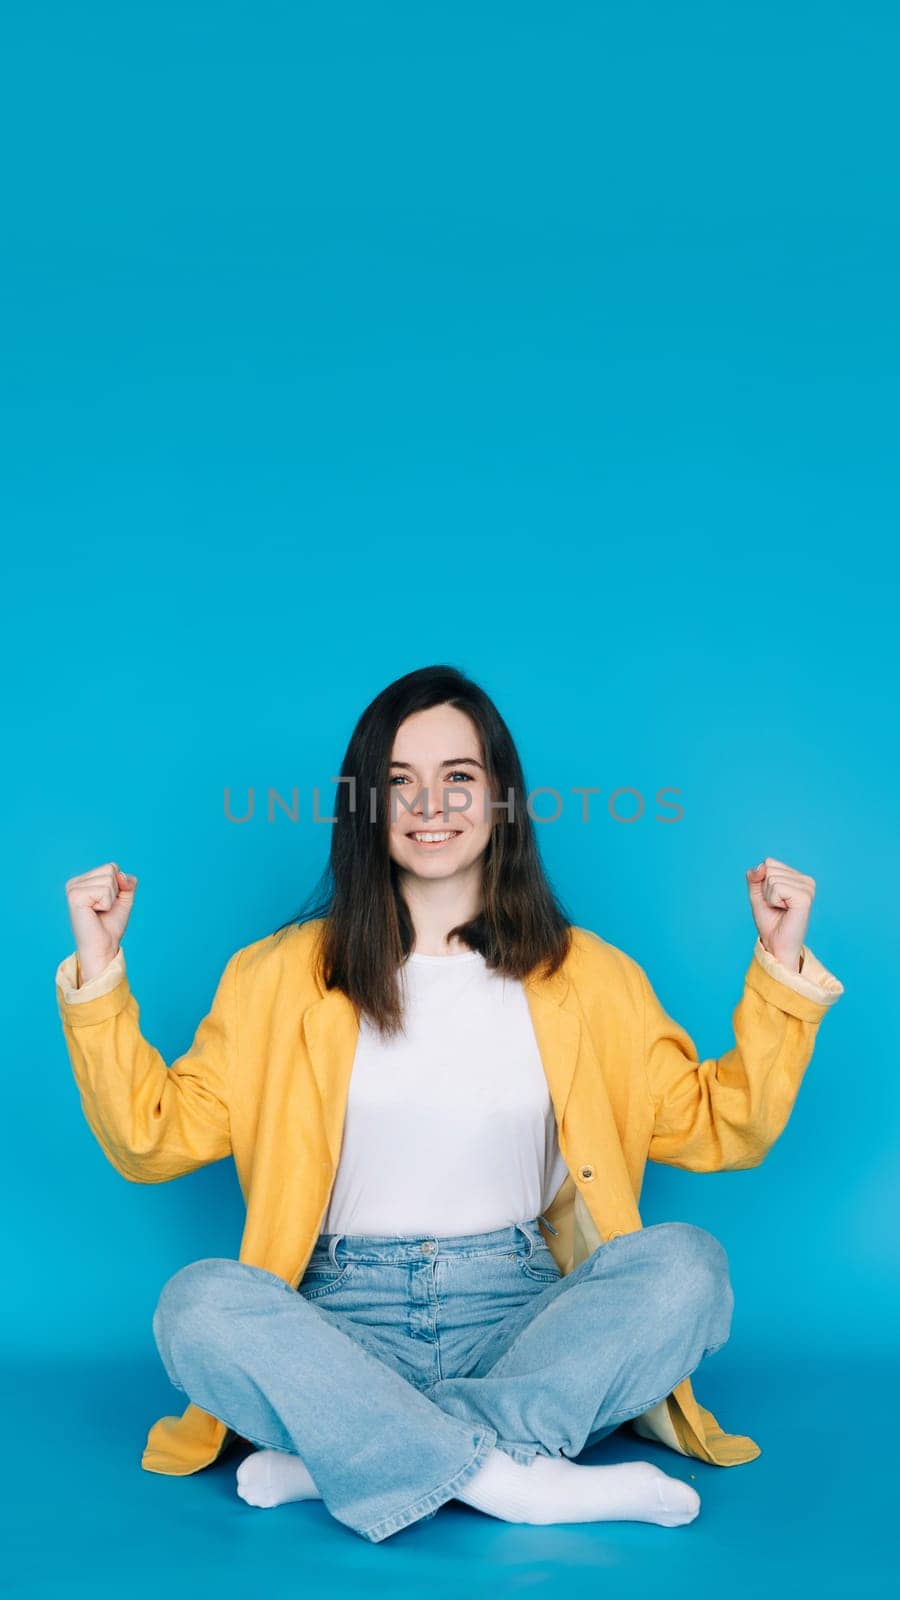 Energetic Young Woman Celebrating Success with Raised Fists, Exclaiming 'Yes ' - Vibrant Blue Background - Positive, Optimistic Concept.